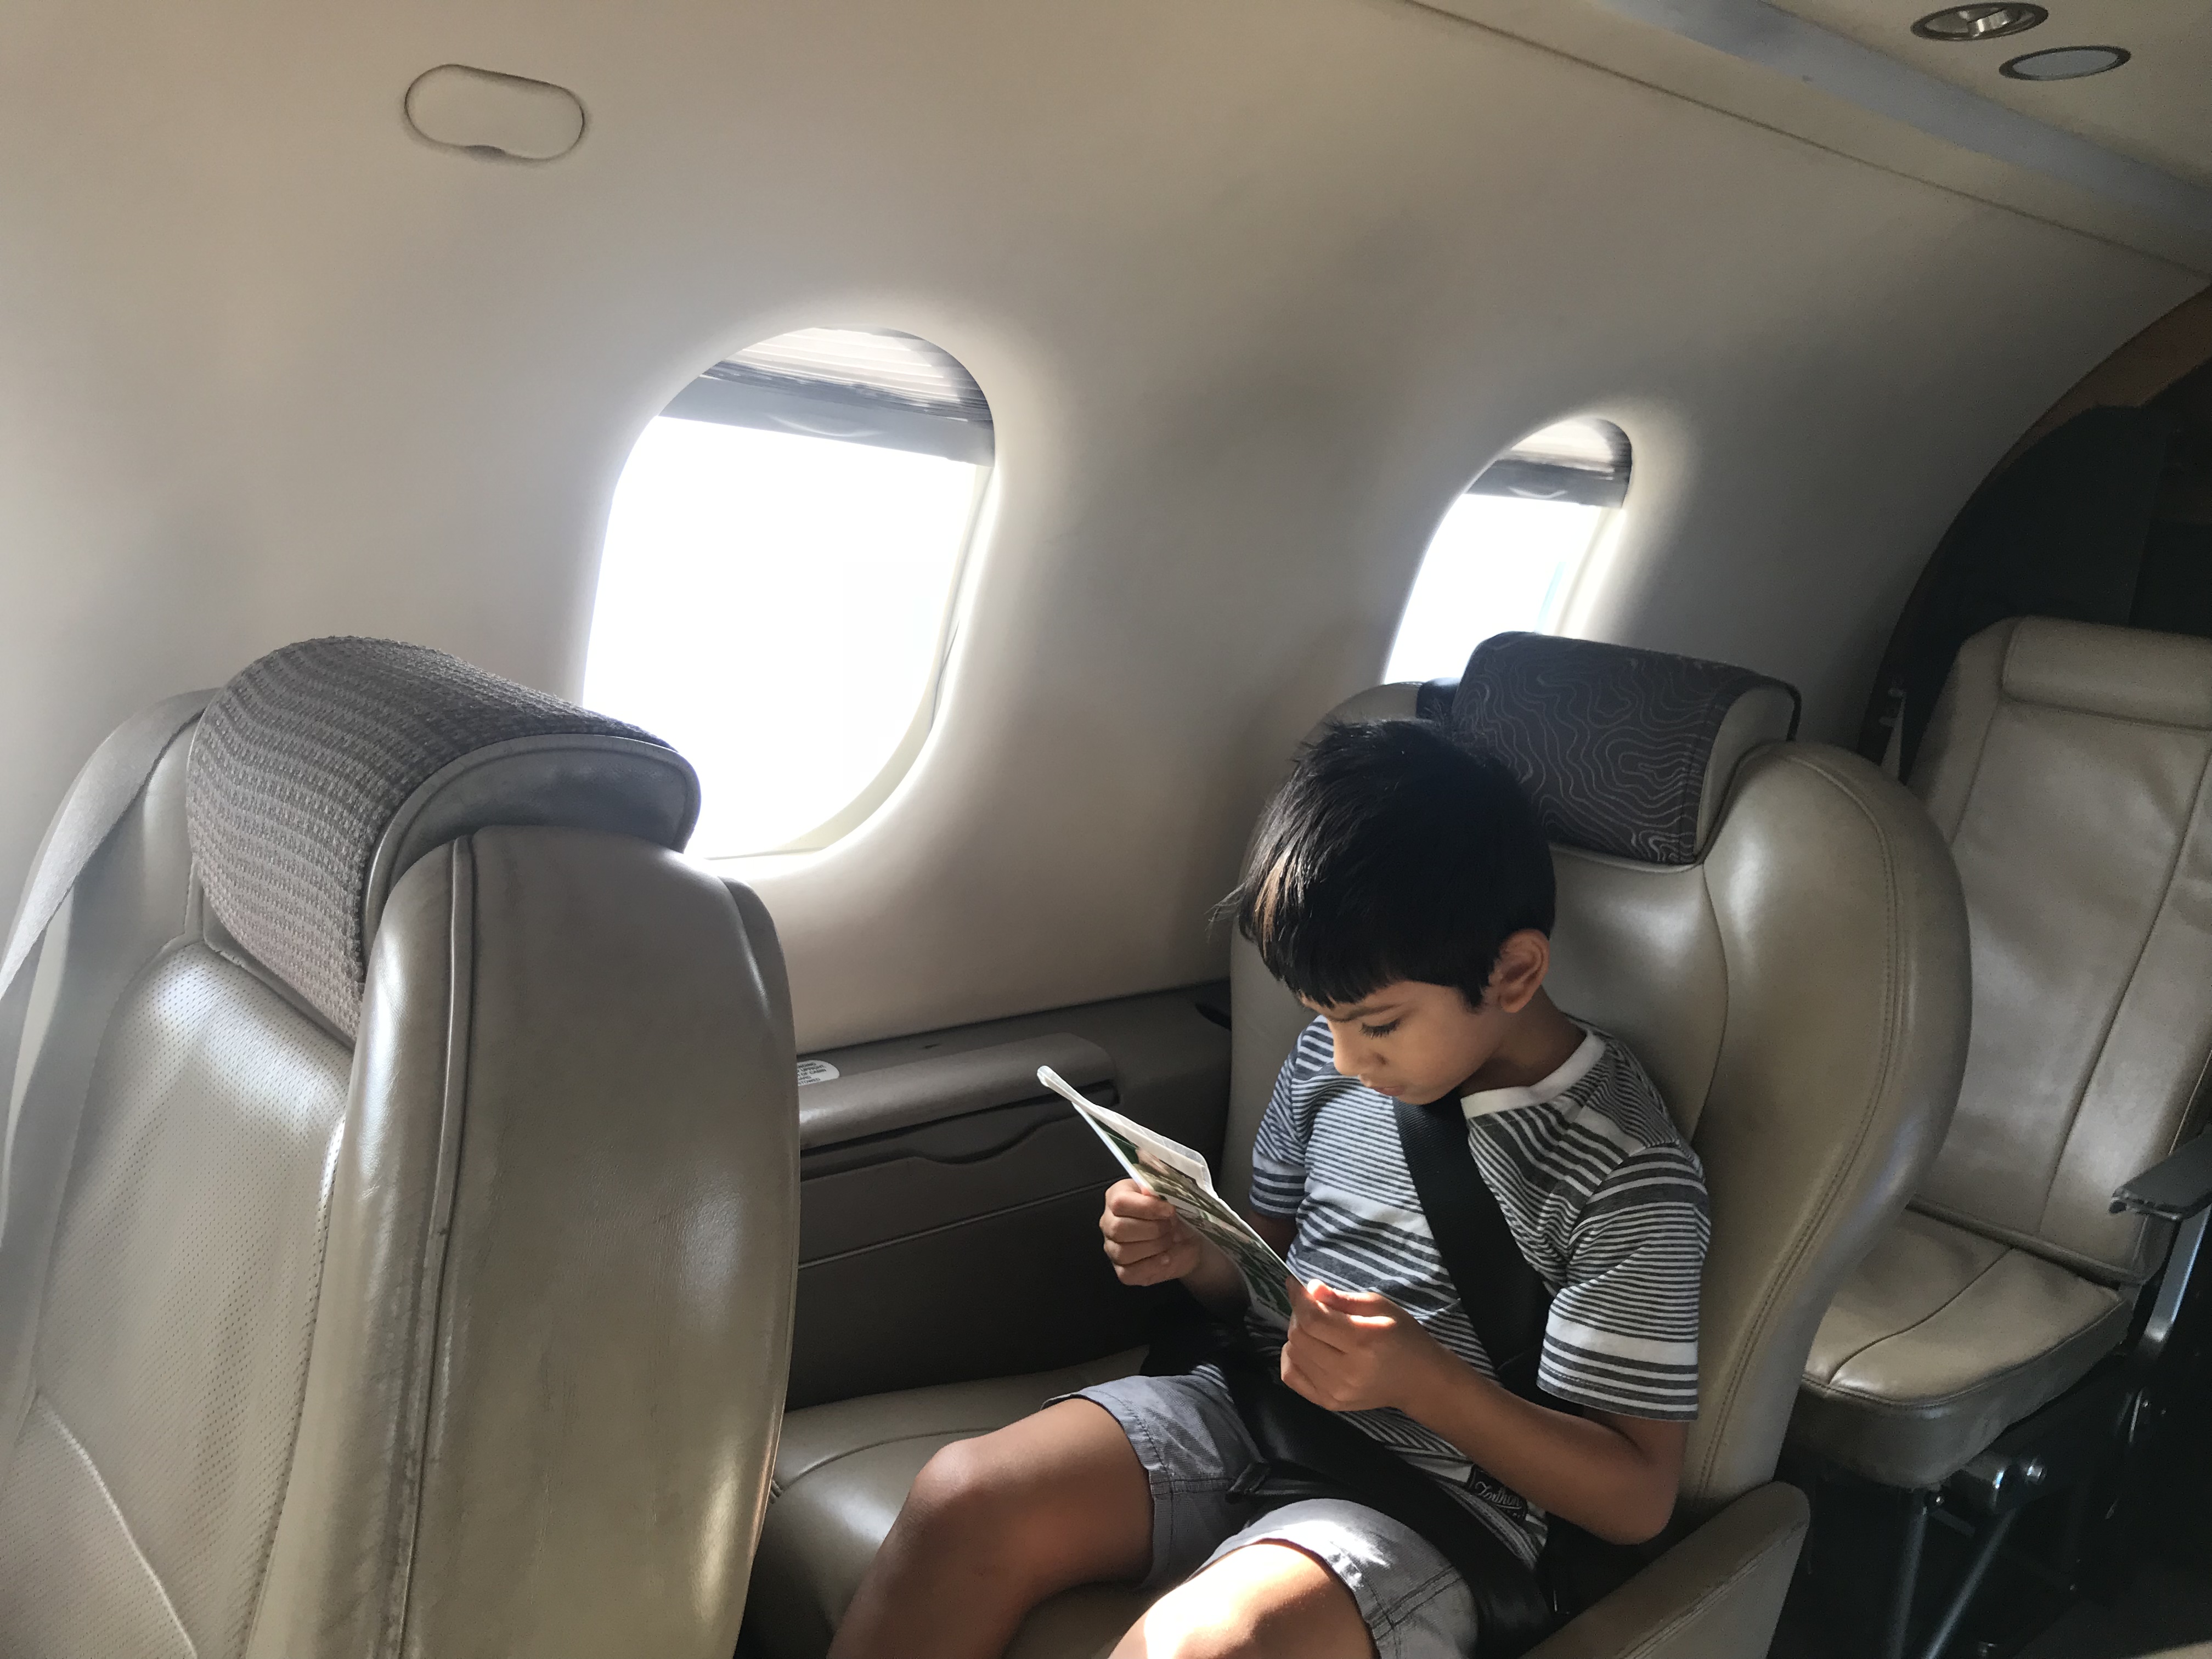 Boutique Air Flight Review The Closest I Ll Ever Come To